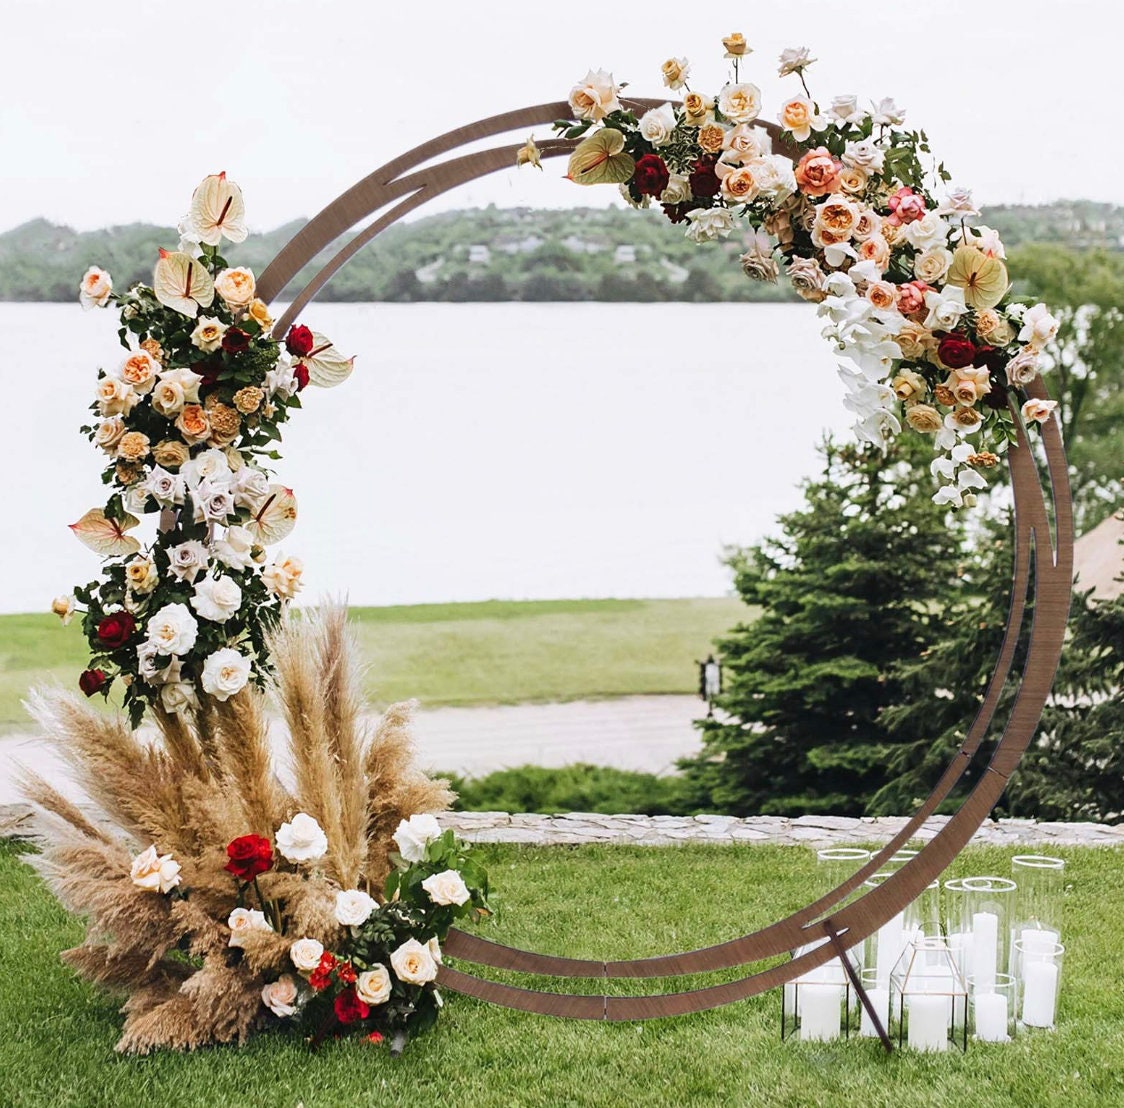 8 FT. Wood Round Wedding Arch Backdrop Brown DIY Stand Rustic Photo Backdrop Heavy Duty Photography Stand Ceremony Outdoor Decoration Floral